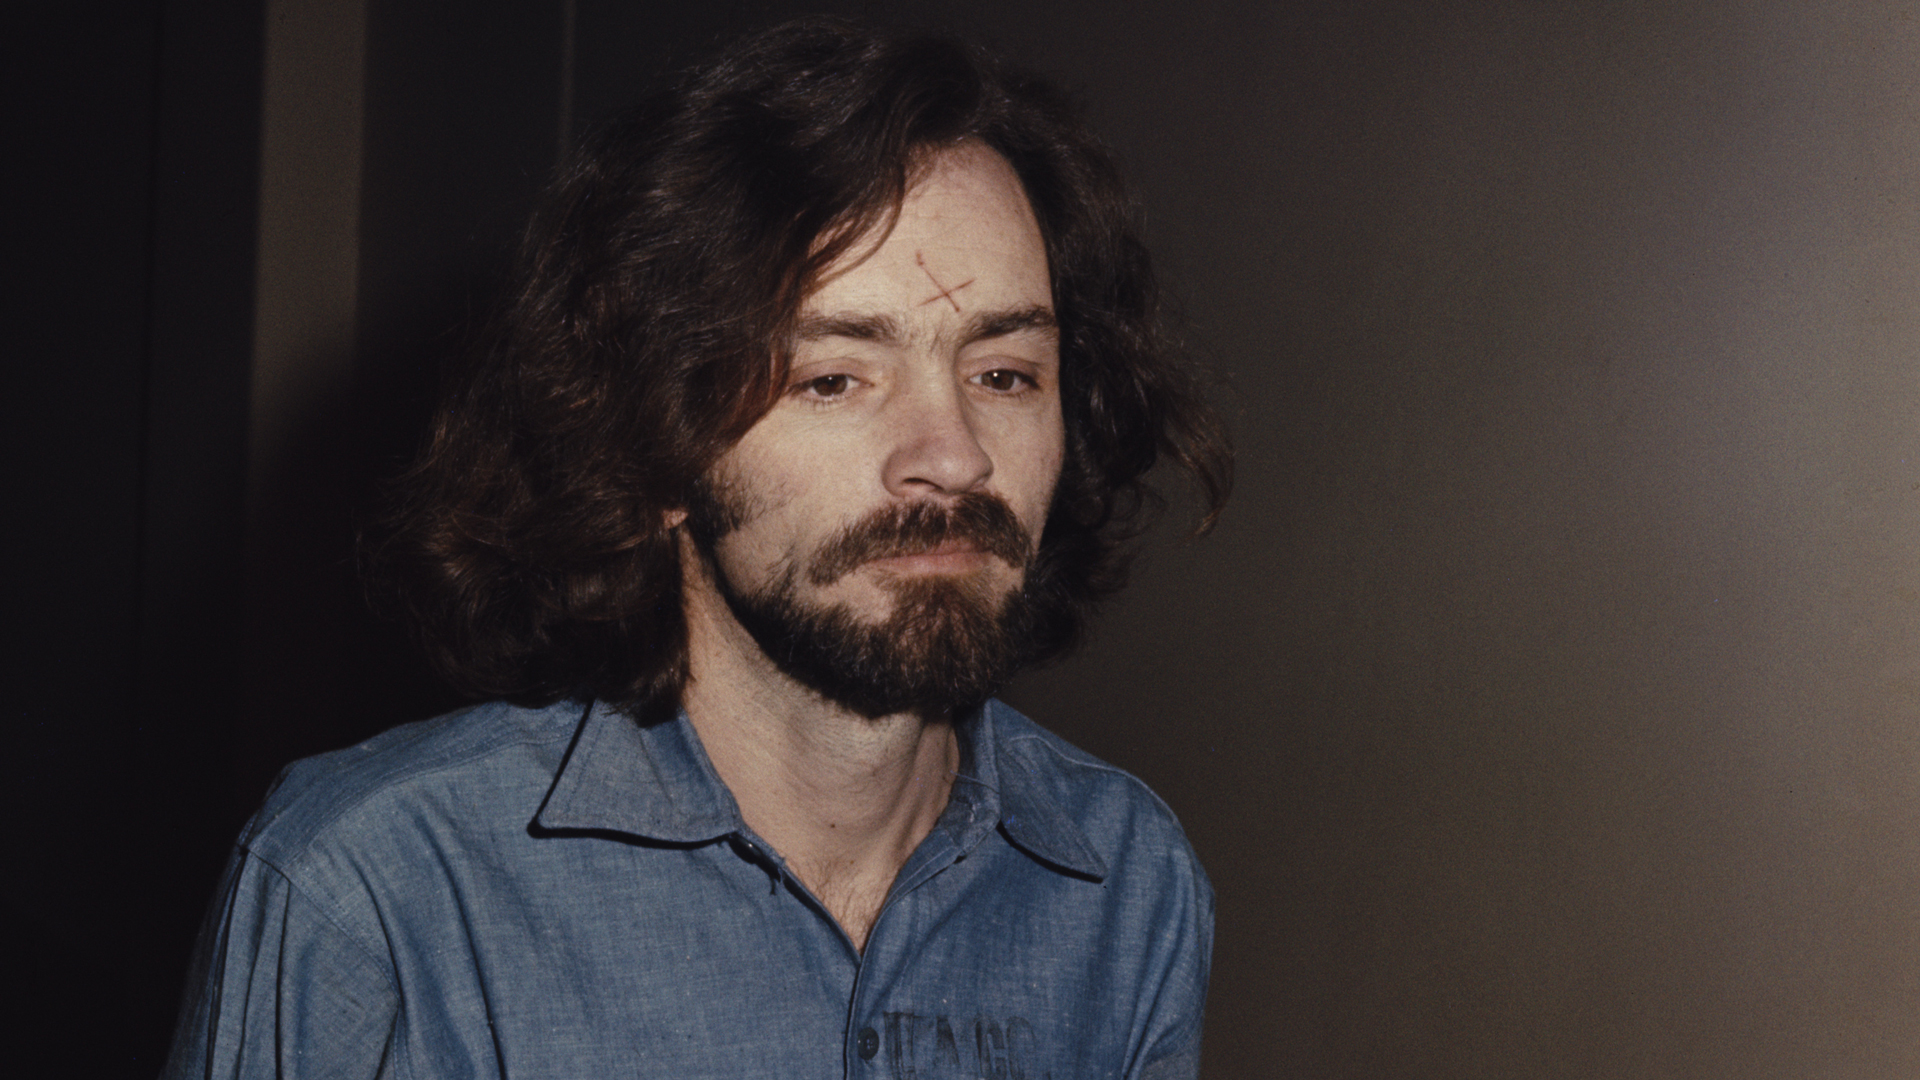 How Charles Manson's Family Has Dealt With the Cult Leader's Murderous Legacy